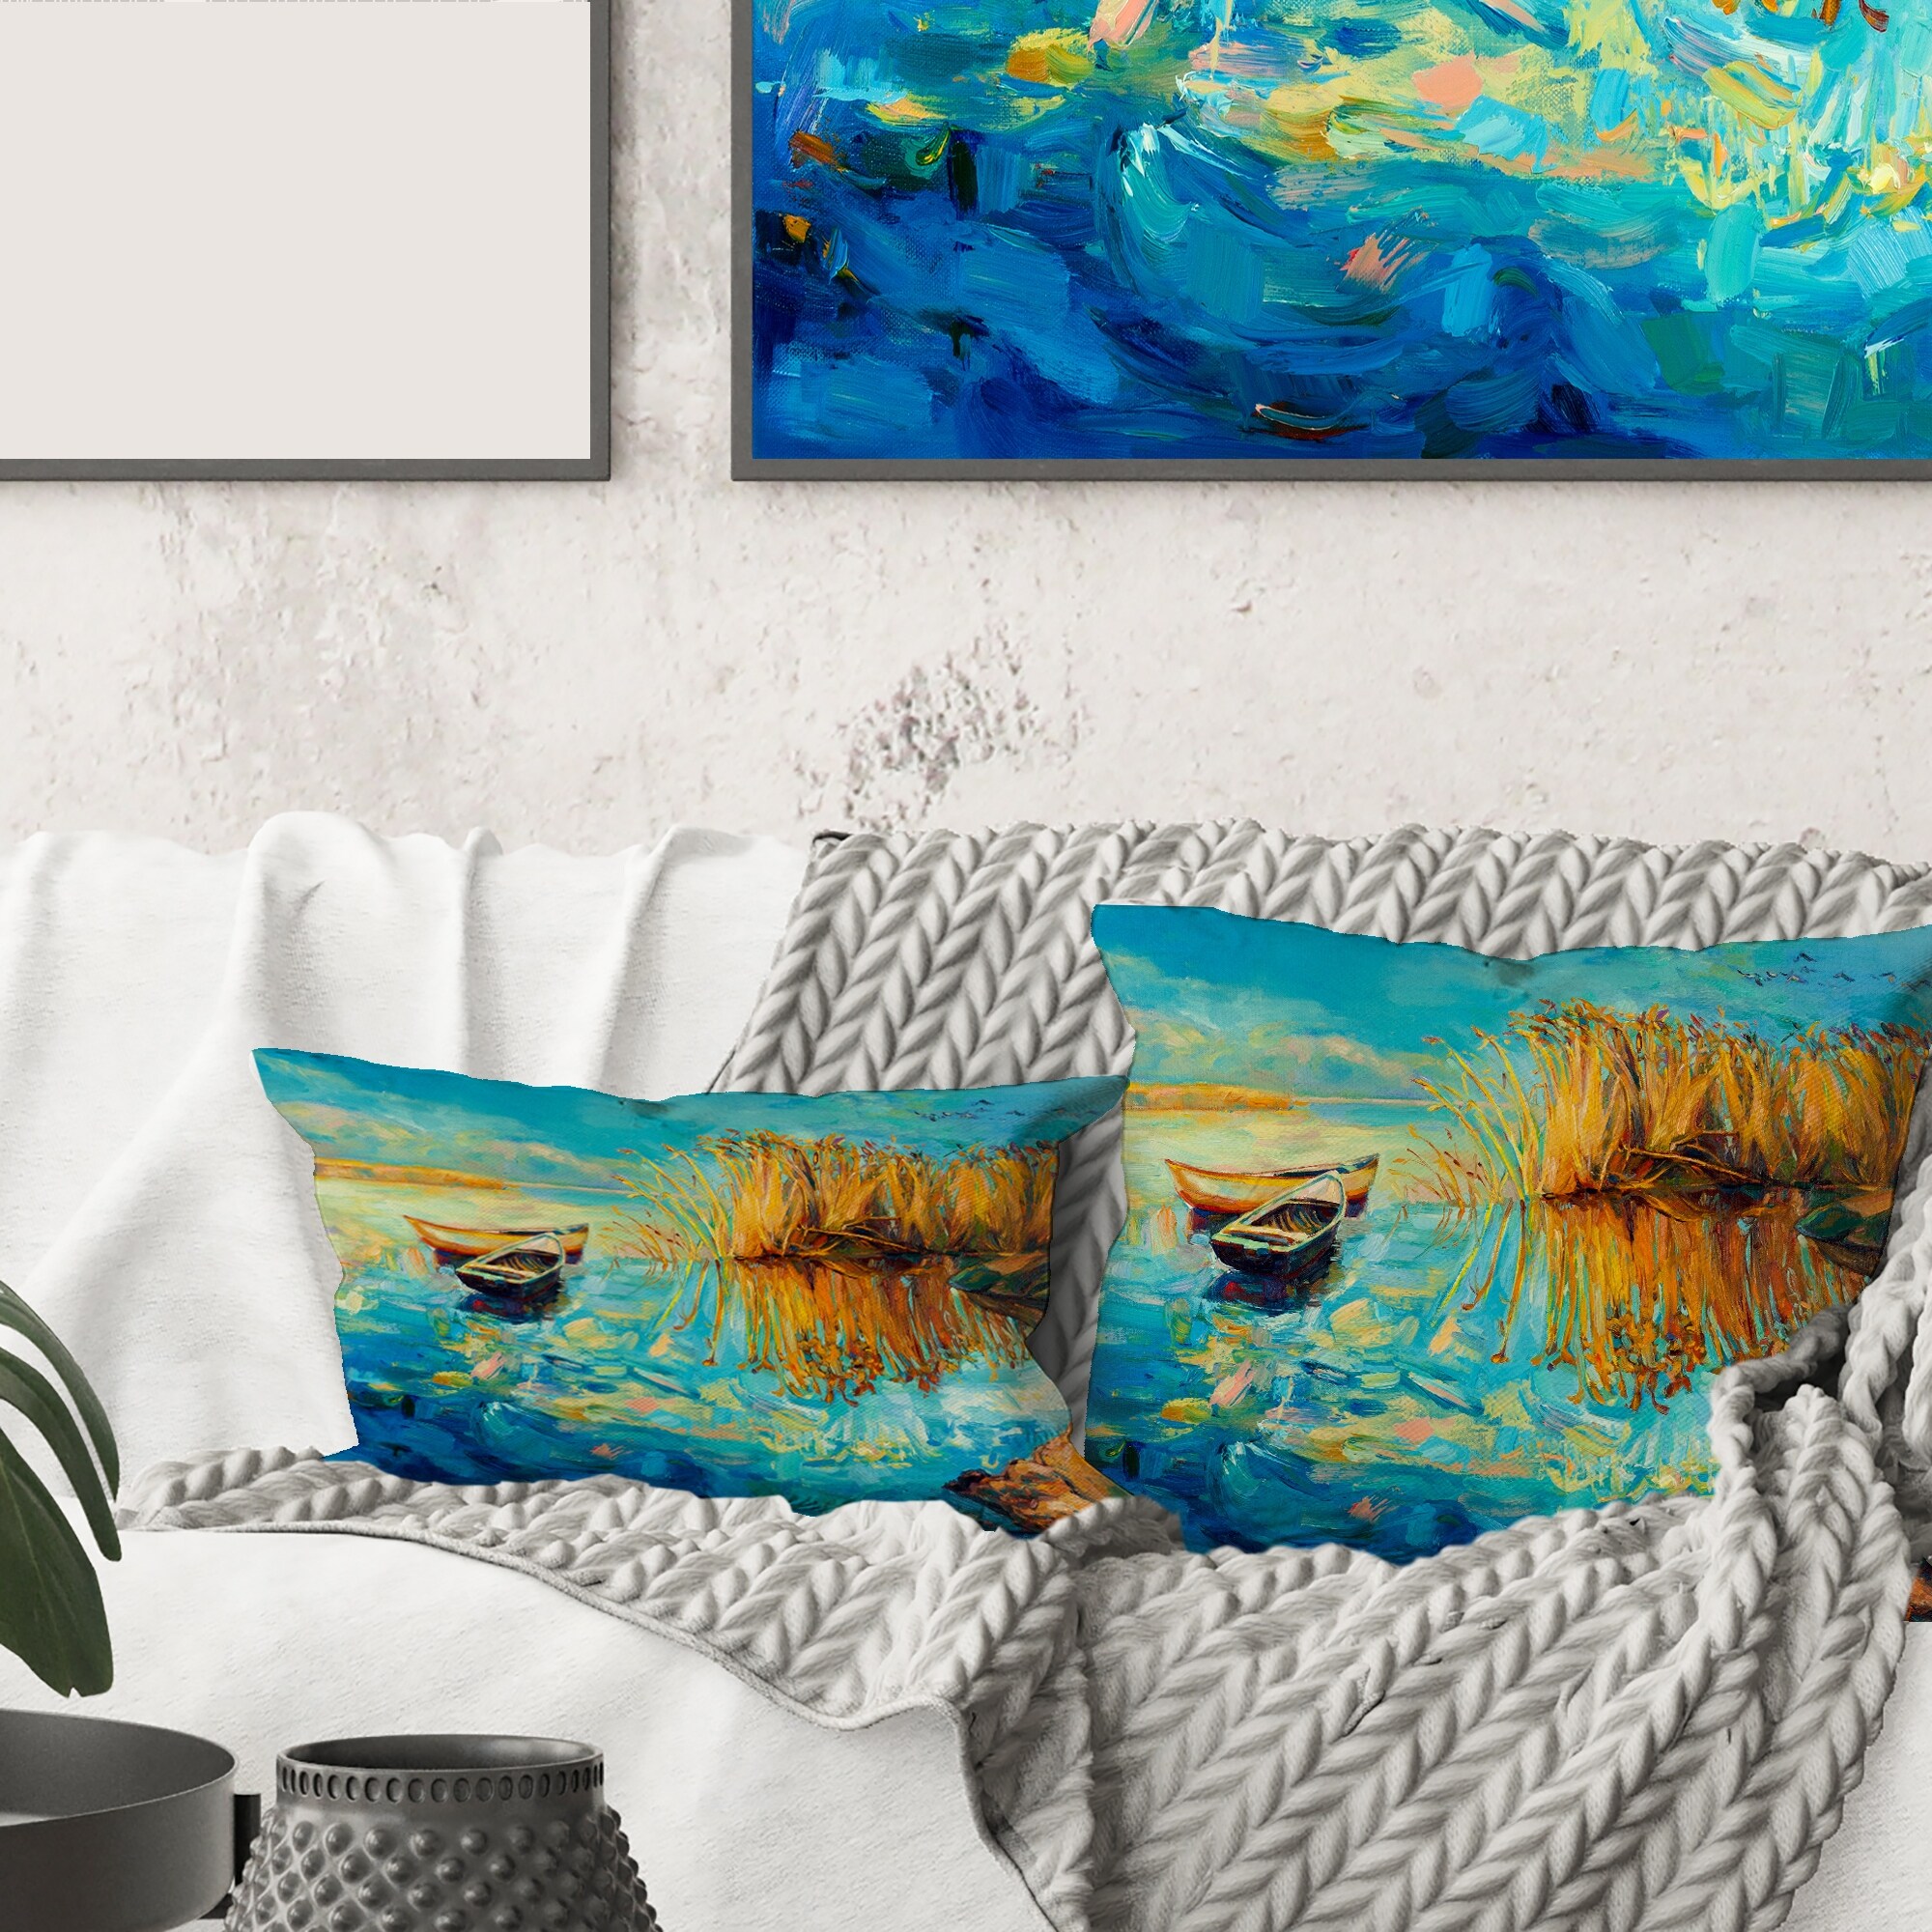 https://ak1.ostkcdn.com/images/products/is/images/direct/3b855fa19f6011ee8efa54733eaae33ac896ccf1/Designart-%27Turquoise-Lake-With-Orange-Trees-During-Sunset%27-Nautical-%26-Coastal-Printed-Throw-Pillow.jpg